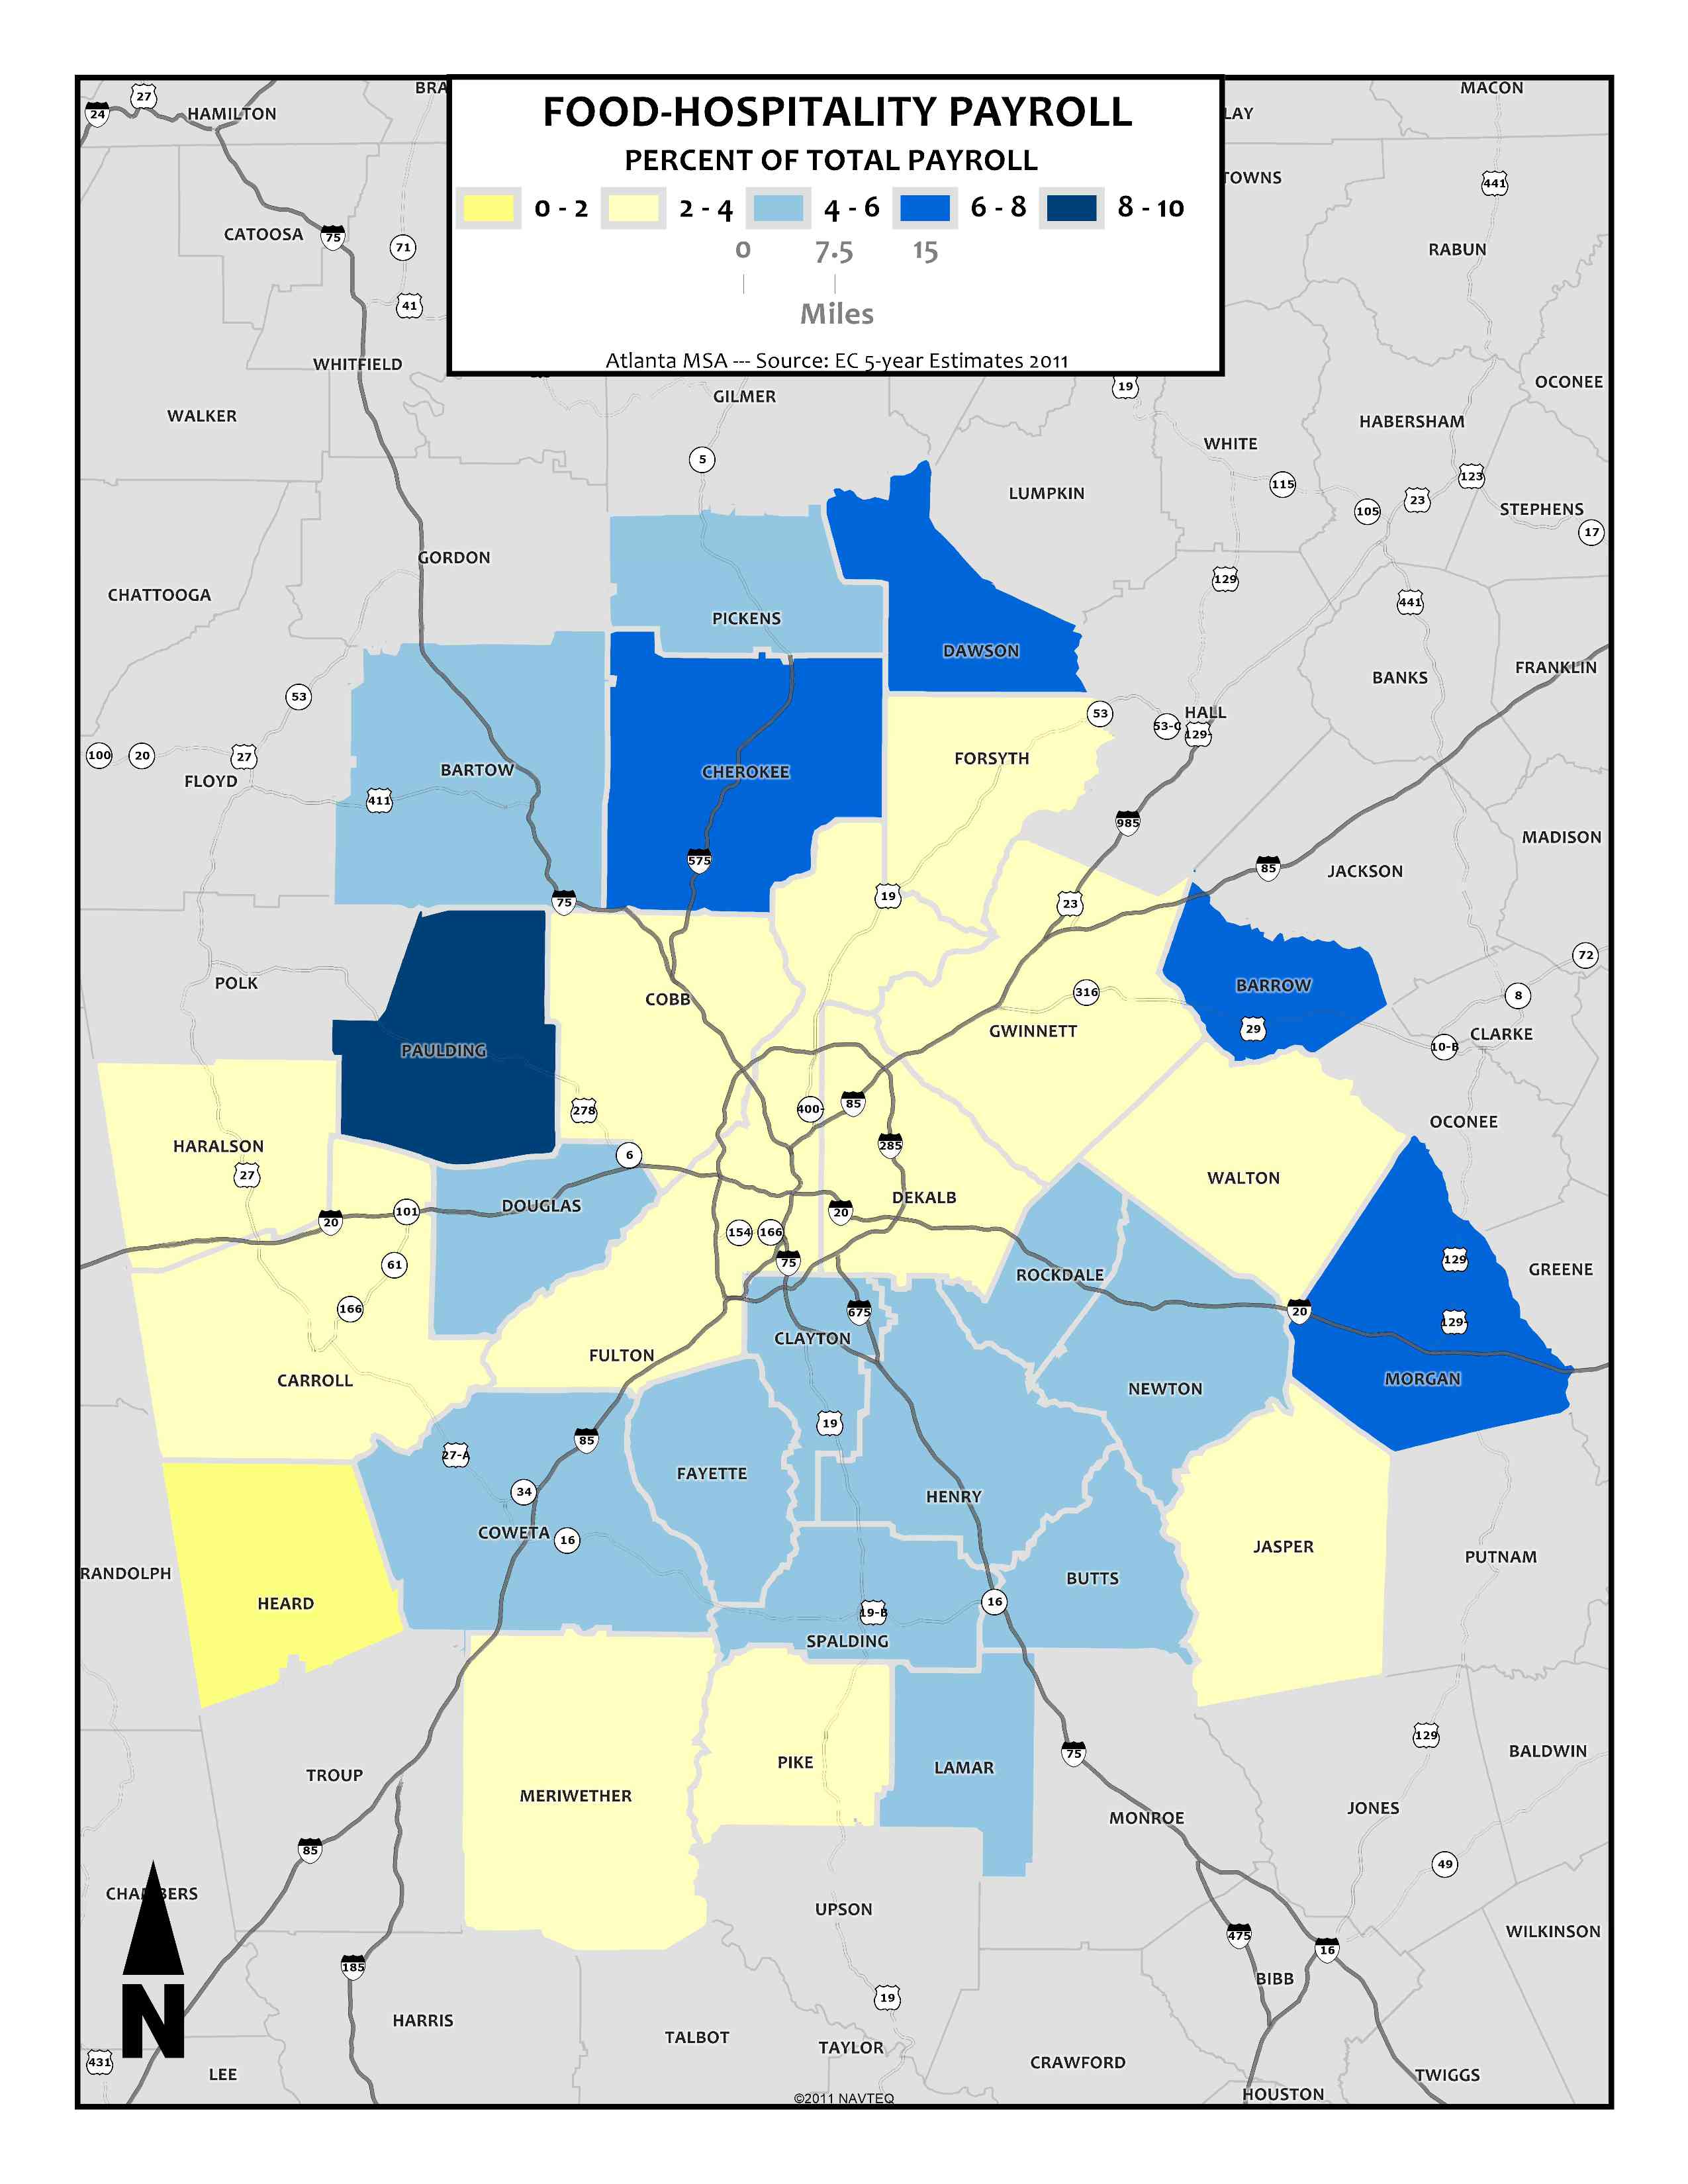 Food & Hospitality Payroll (Industry Share), 2011 – metro counties